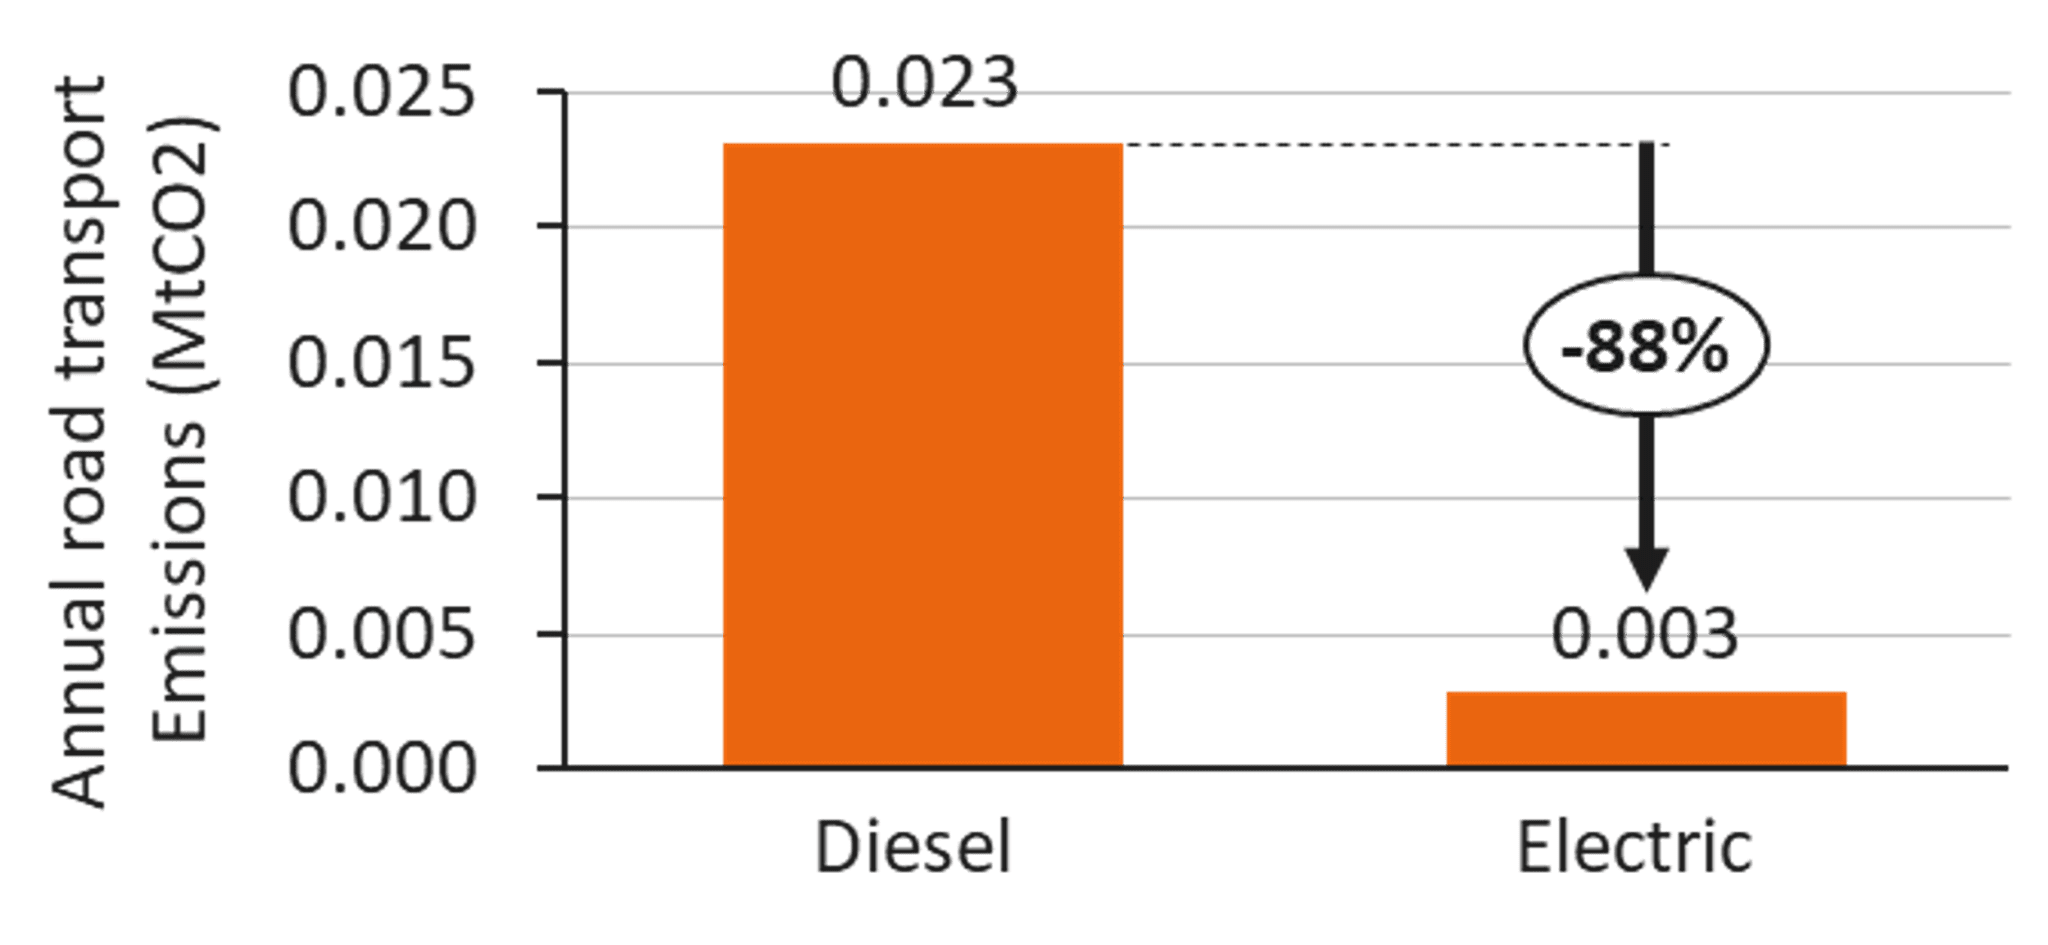 A bar chart (orange bars) shows the annual carbon emissions reduction for electrification of RCVs. The annual carbon dioxide emissions for a fully diesel fleet is 0.023 mega-tonnes of carbon dioxide and the annual carbon dioxide emissions for a fully electrified fleet is 0.003 mega-tonnes of carbon dioxide. 